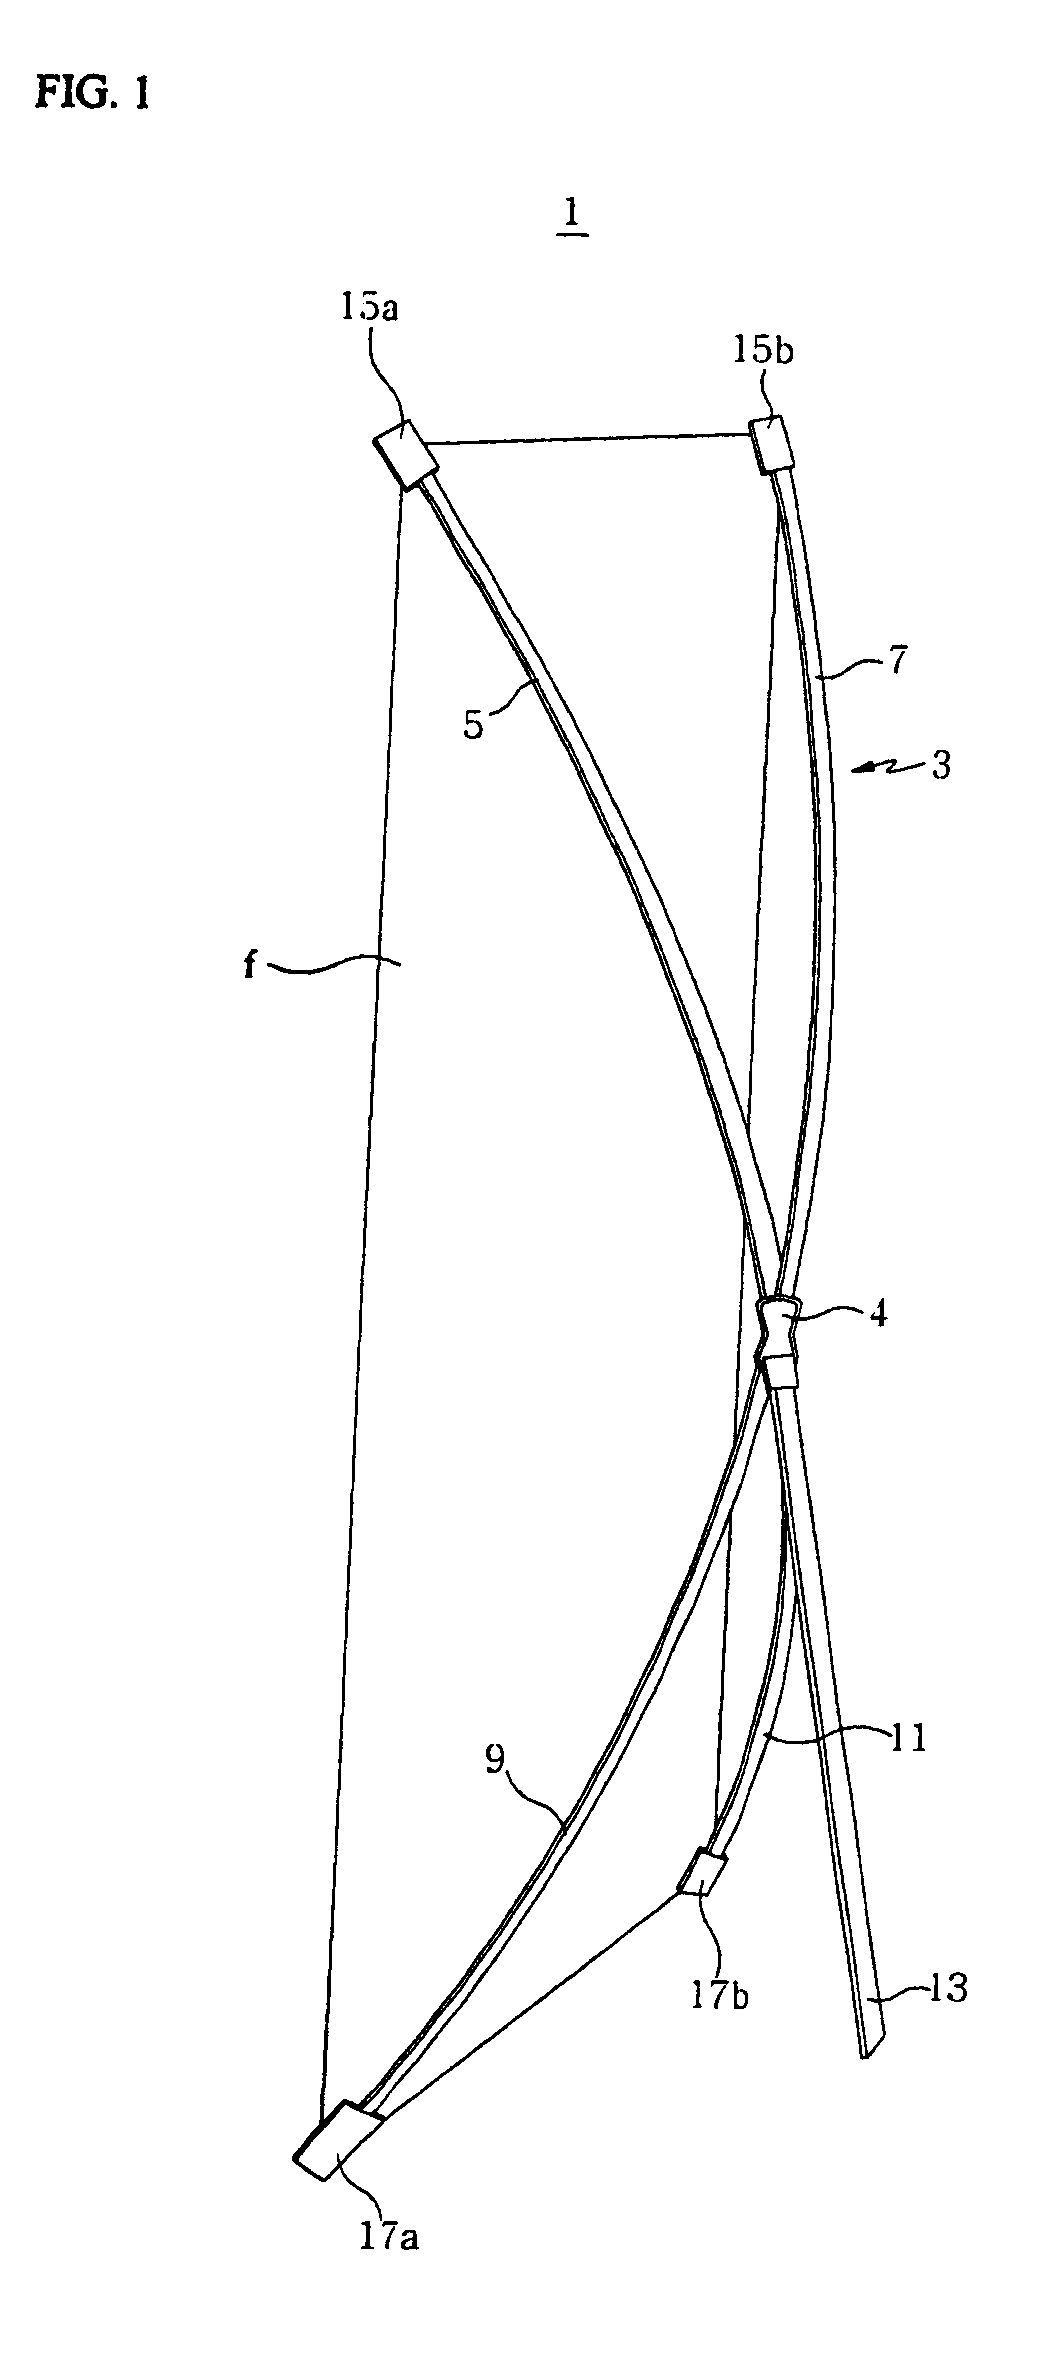 Apparatus for supporting banner